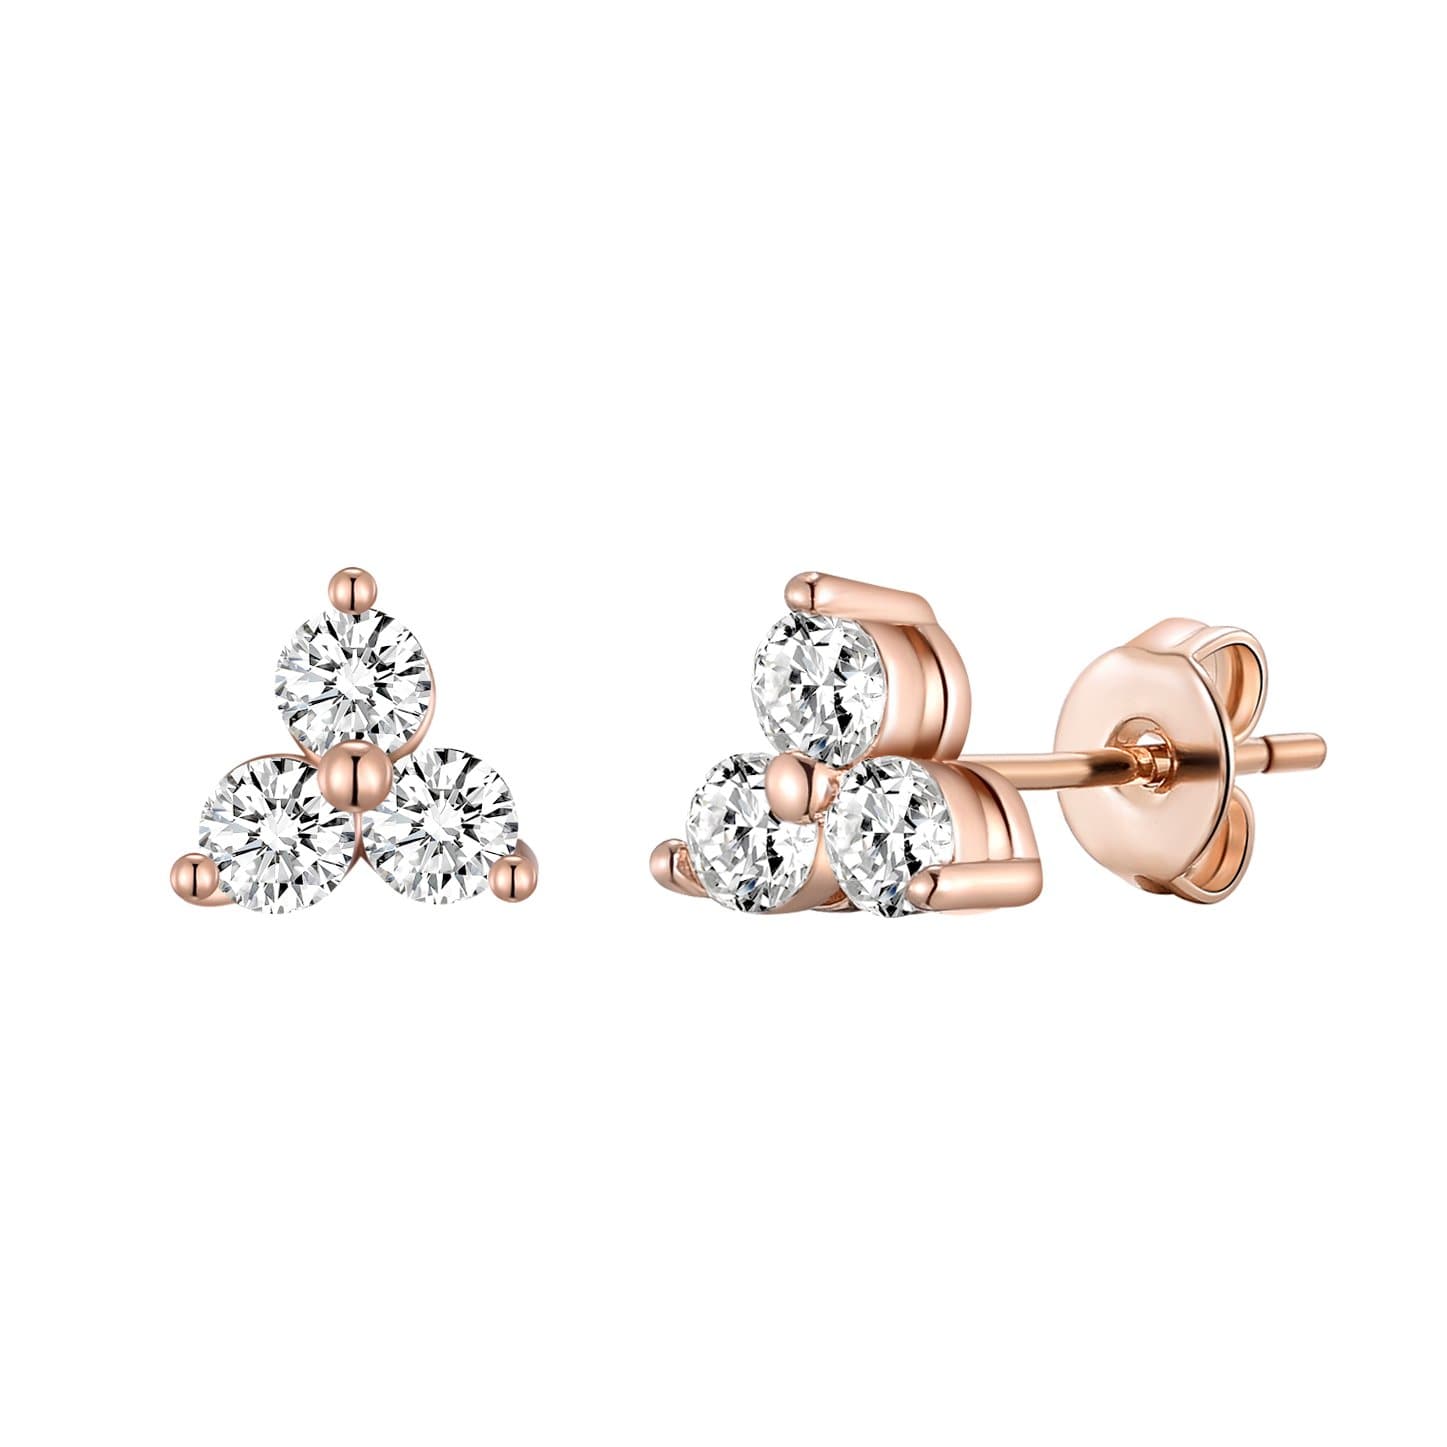 Rose Gold Plated Three Stone Earrings Created with Zircondia® Crystals by Philip Jones Jewellery